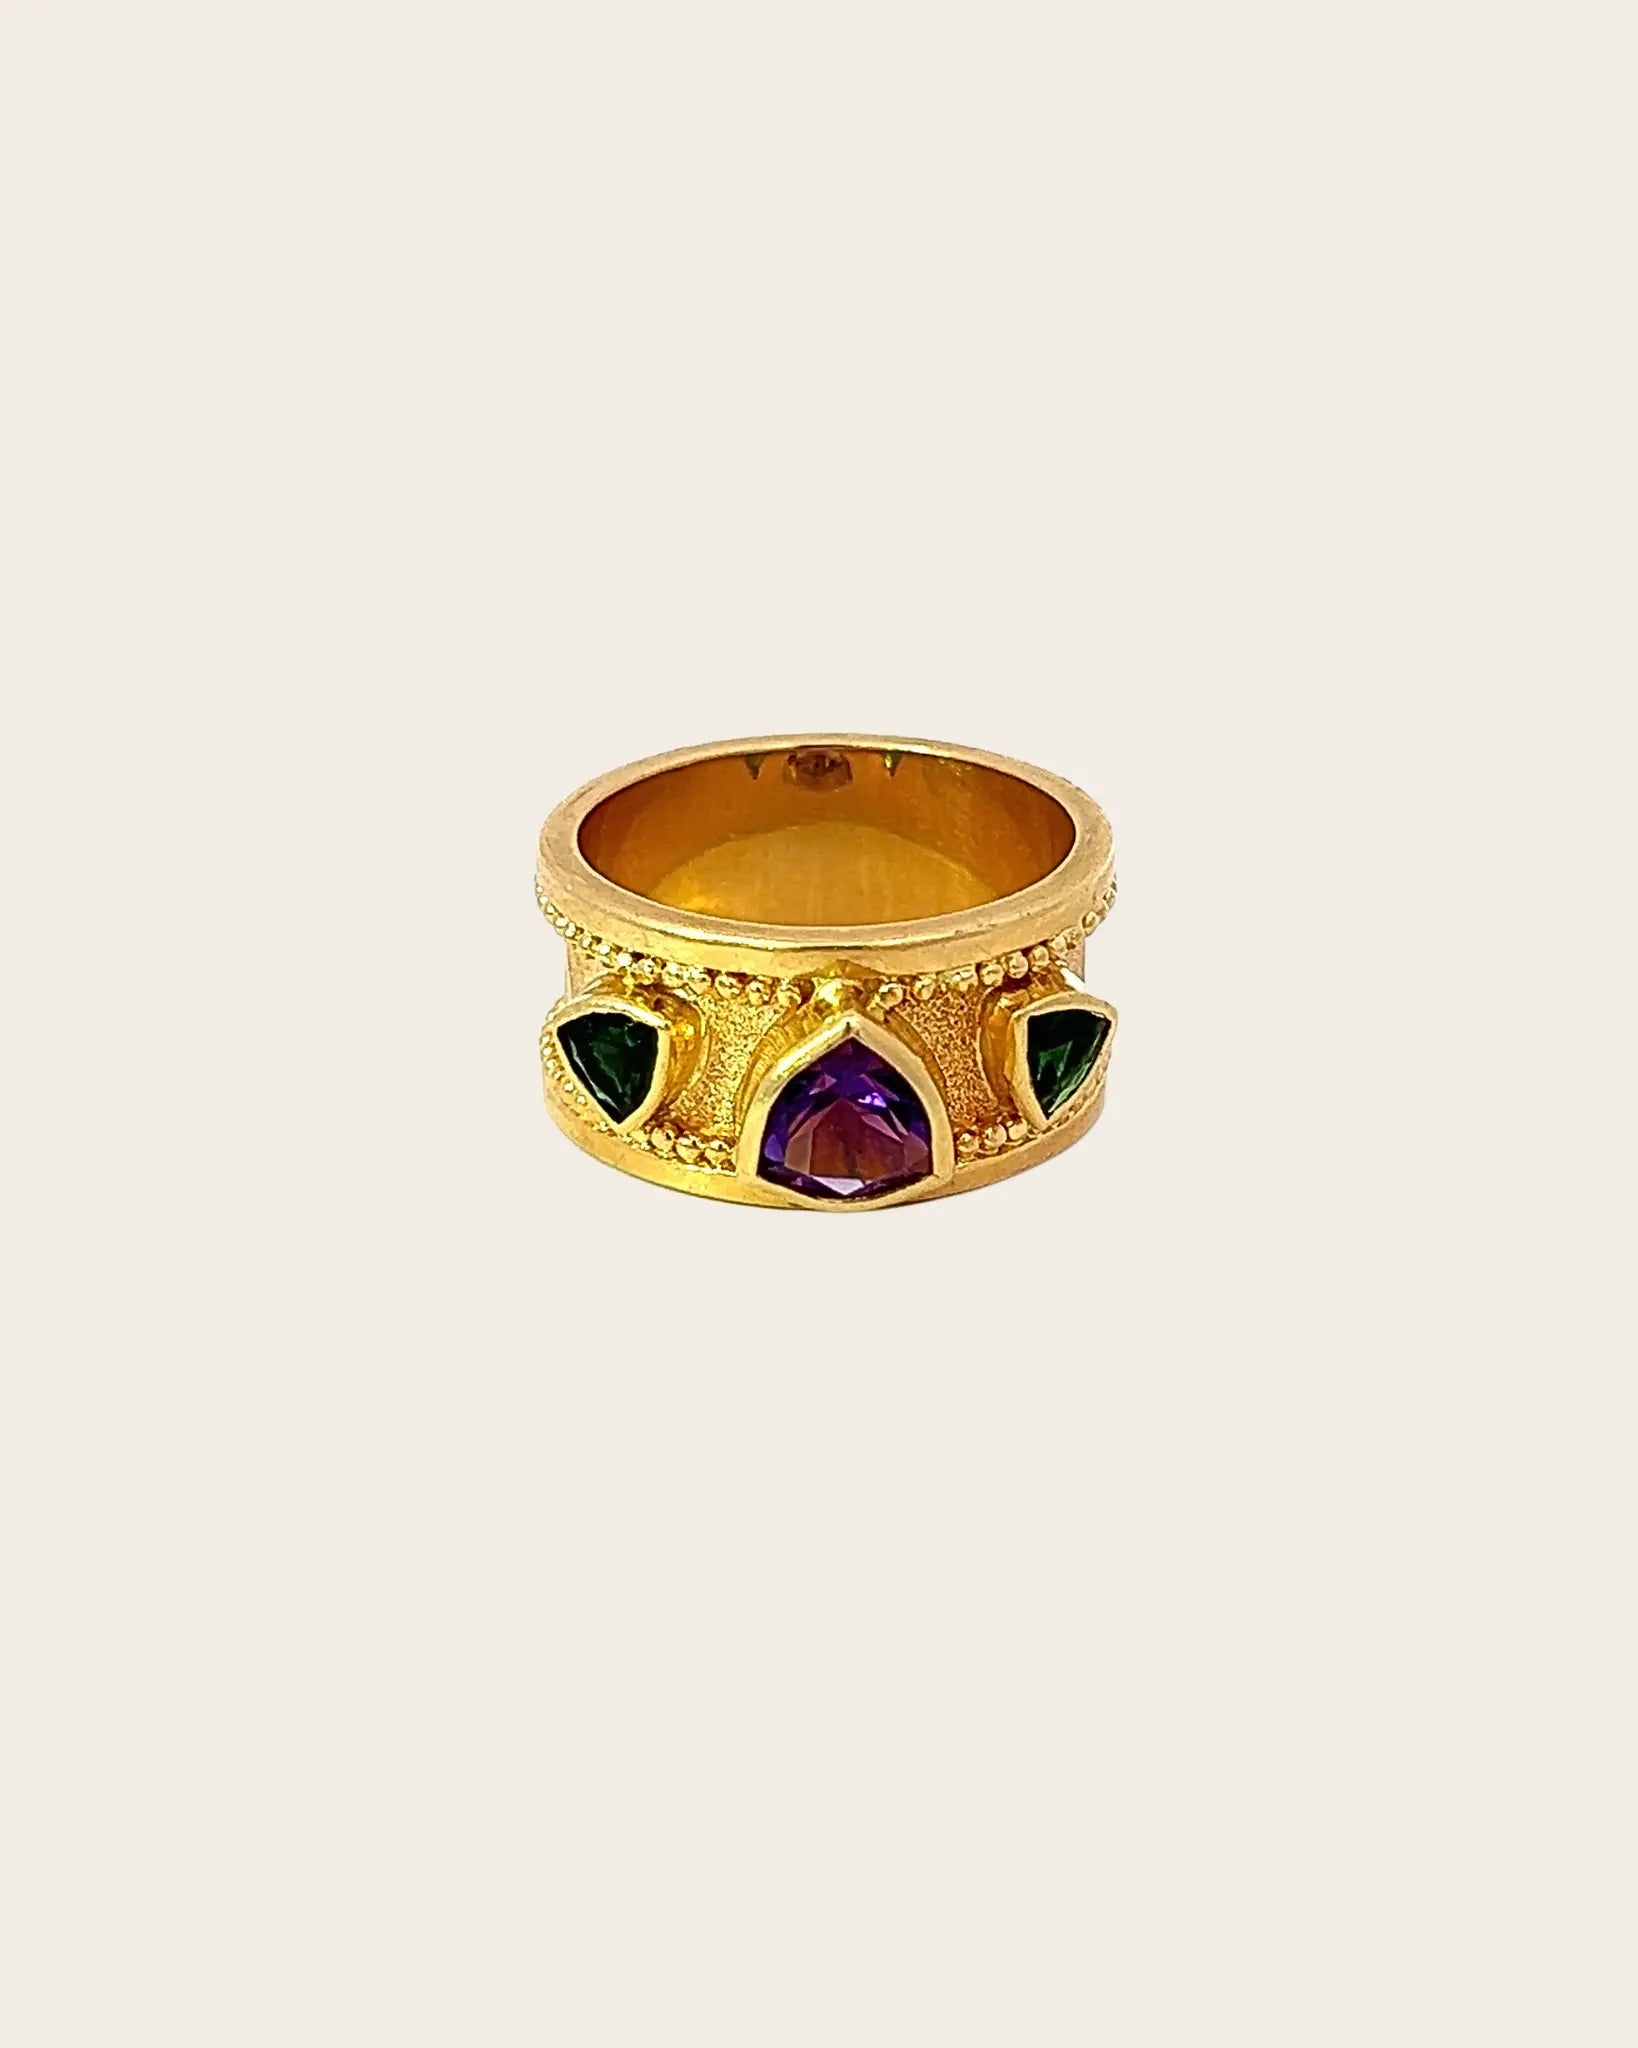 Amethyst and Tourmaline Band Ring Amethyst and Tourmaline Band Ring Vintage at the Squash Blossom Vintage at the Squash Blossom  Squash Blossom Vail